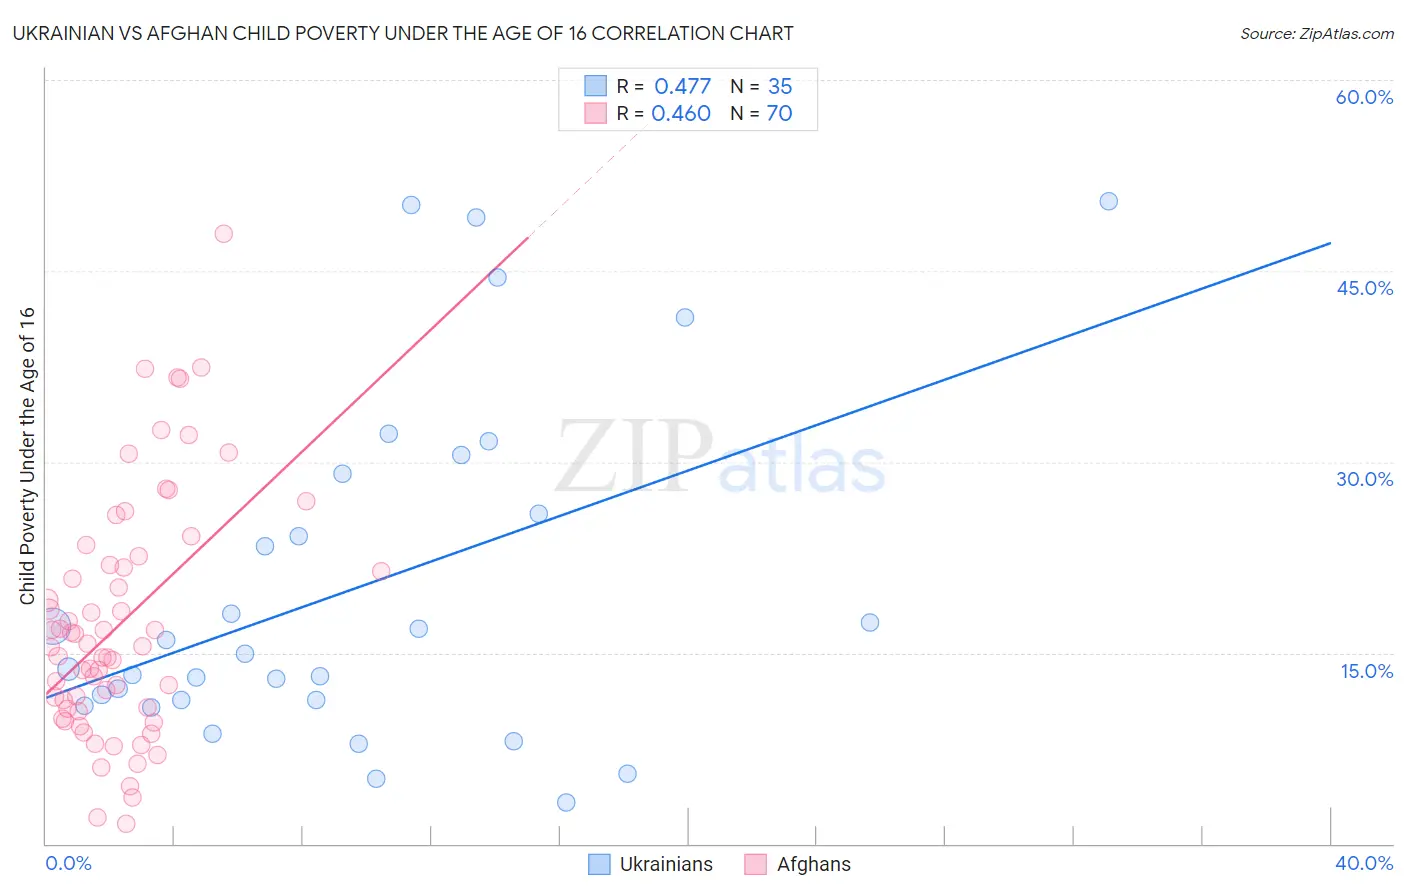 Ukrainian vs Afghan Child Poverty Under the Age of 16